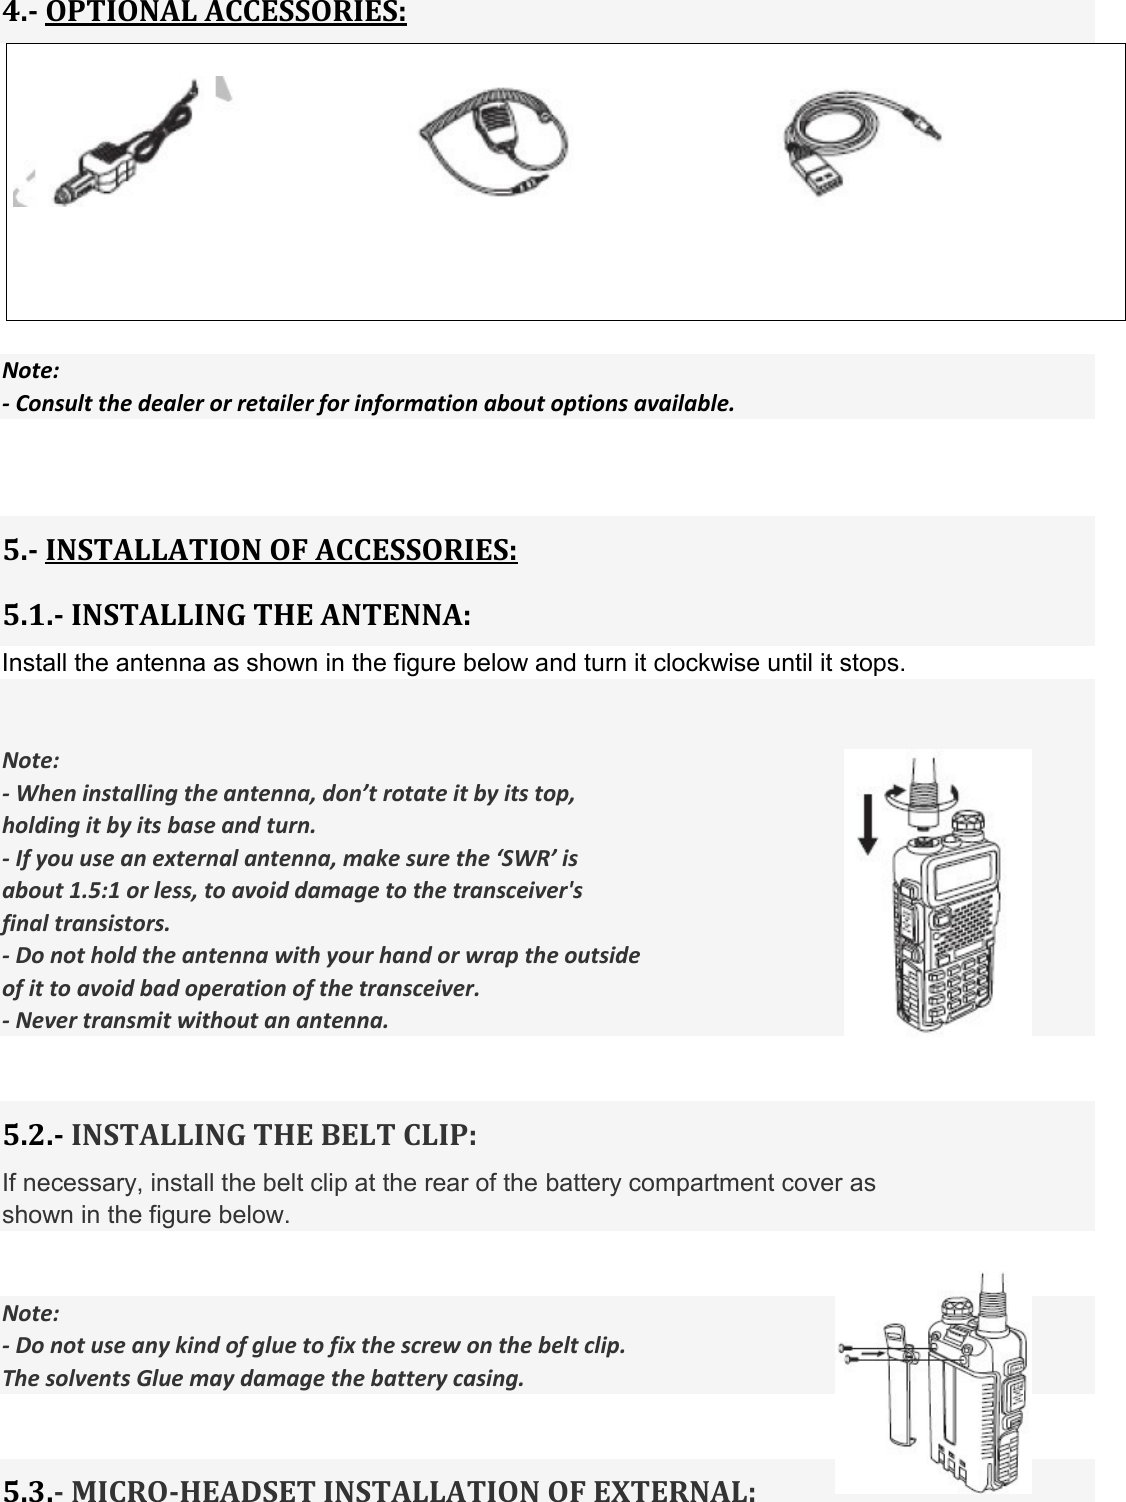 4.- OPTIONAL ACCESSORIES:       Note: - Consult the dealer or retailer for information about options available.     5.- INSTALLATION OF ACCESSORIES: 5.1.- INSTALLING THE ANTENNA: Install the antenna as shown in the figure below and turn it clockwise until it stops.   Note: - When installing the antenna, don’t rotate it by its top, holding it by its base and turn. - If you use an external antenna, make sure the ‘SWR’ is   about 1.5:1 or less, to avoid damage to the transceiver&apos;s   final transistors. - Do not hold the antenna with your hand or wrap the outside of it to avoid bad operation of the transceiver. - Never transmit without an antenna.   5.2.- INSTALLING THE BELT CLIP: If necessary, install the belt clip at the rear of the battery compartment cover as   shown in the figure below.   Note: - Do not use any kind of glue to fix the screw on the belt clip.   The solvents Glue may damage the battery casing.   5.3.- MICRO-HEADSET INSTALLATION OF EXTERNAL:  